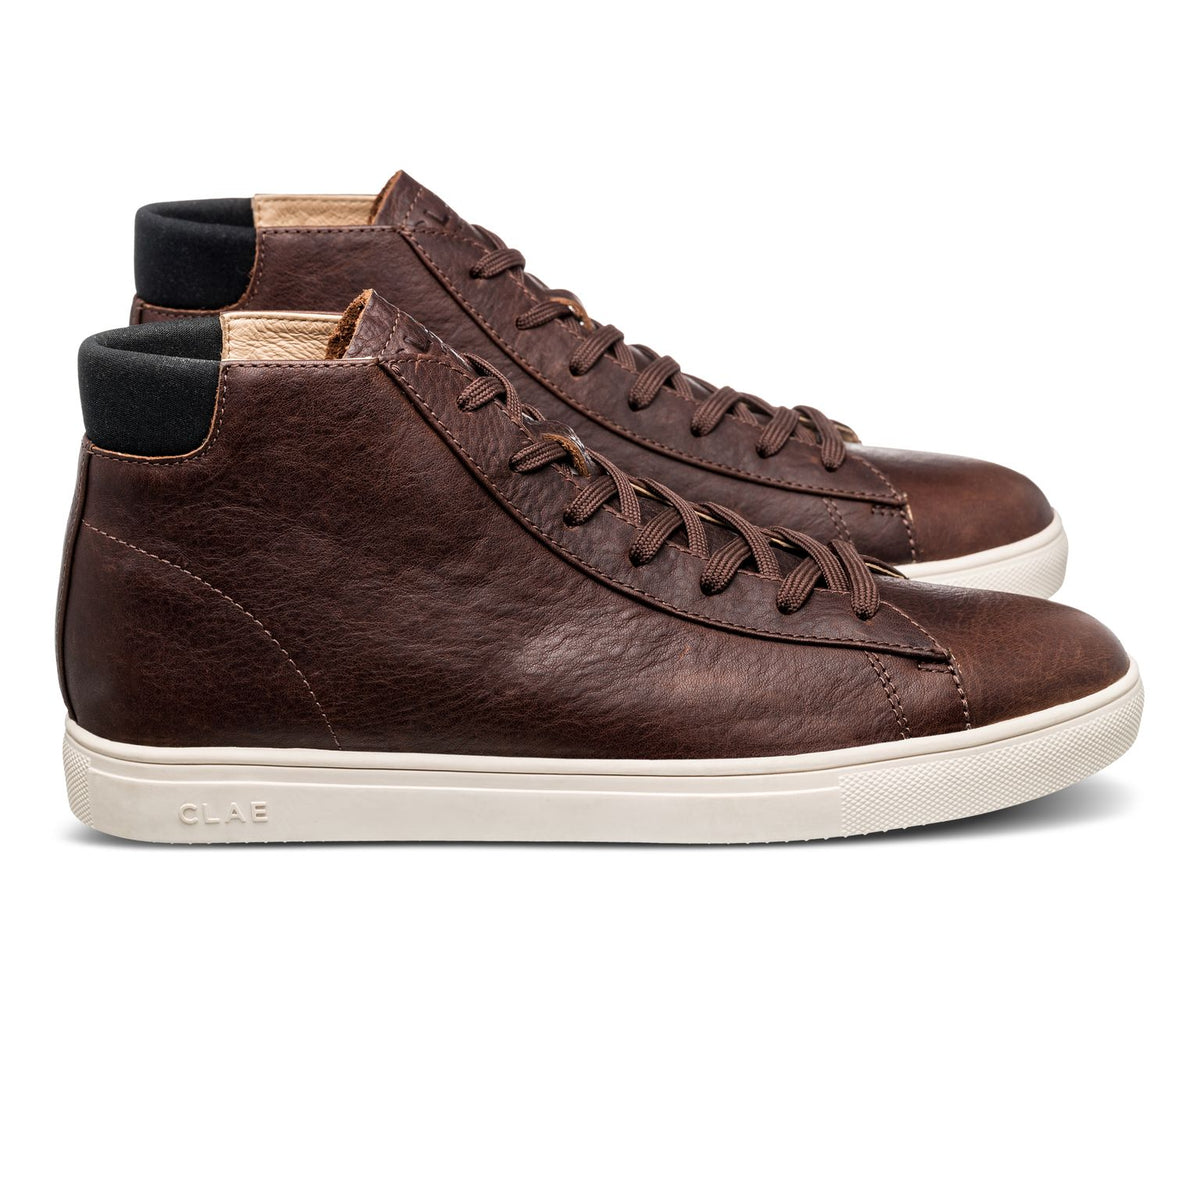 CLAE Bradley Mid Cocoa Oiled Leather Sneakers